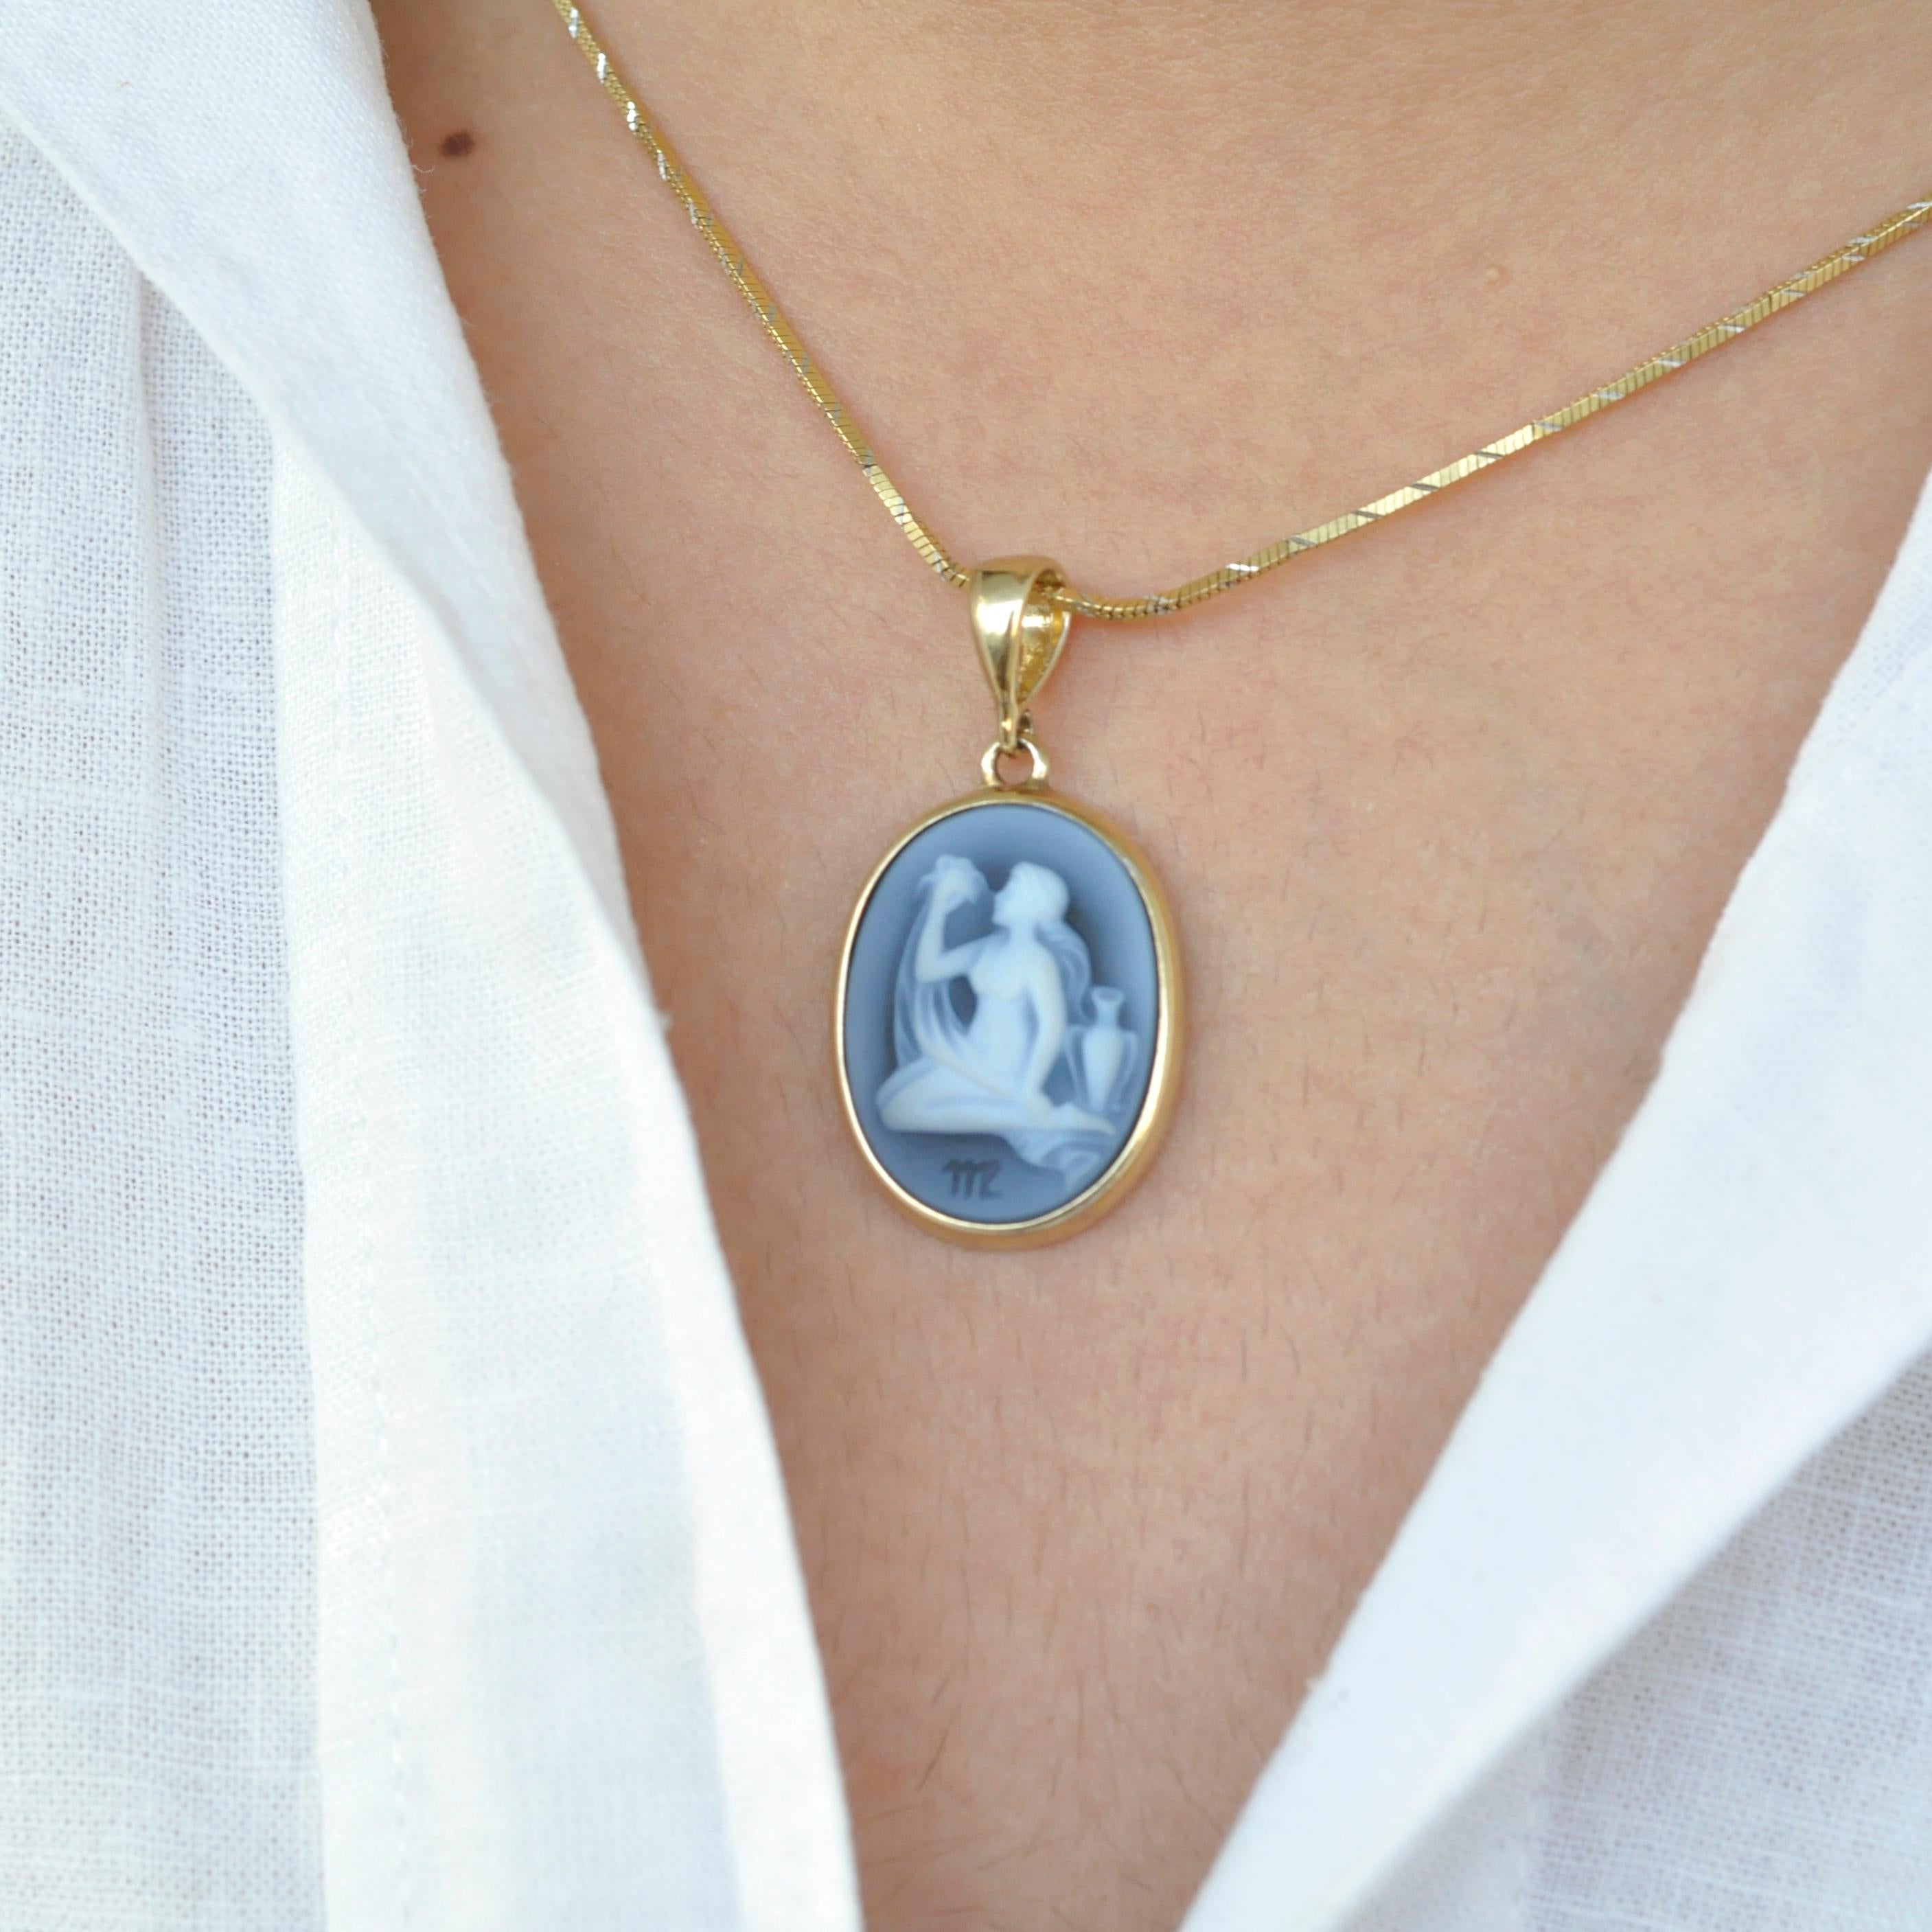 Handcarved virgo zodiac agate cameo 925 sterling silver pendant necklace.

Here's our virgo zodiac carving cameo pendant necklace from the zodiac collection. The Cameo is made in Germany by an expert cameo engraver on the relief of 100% natural